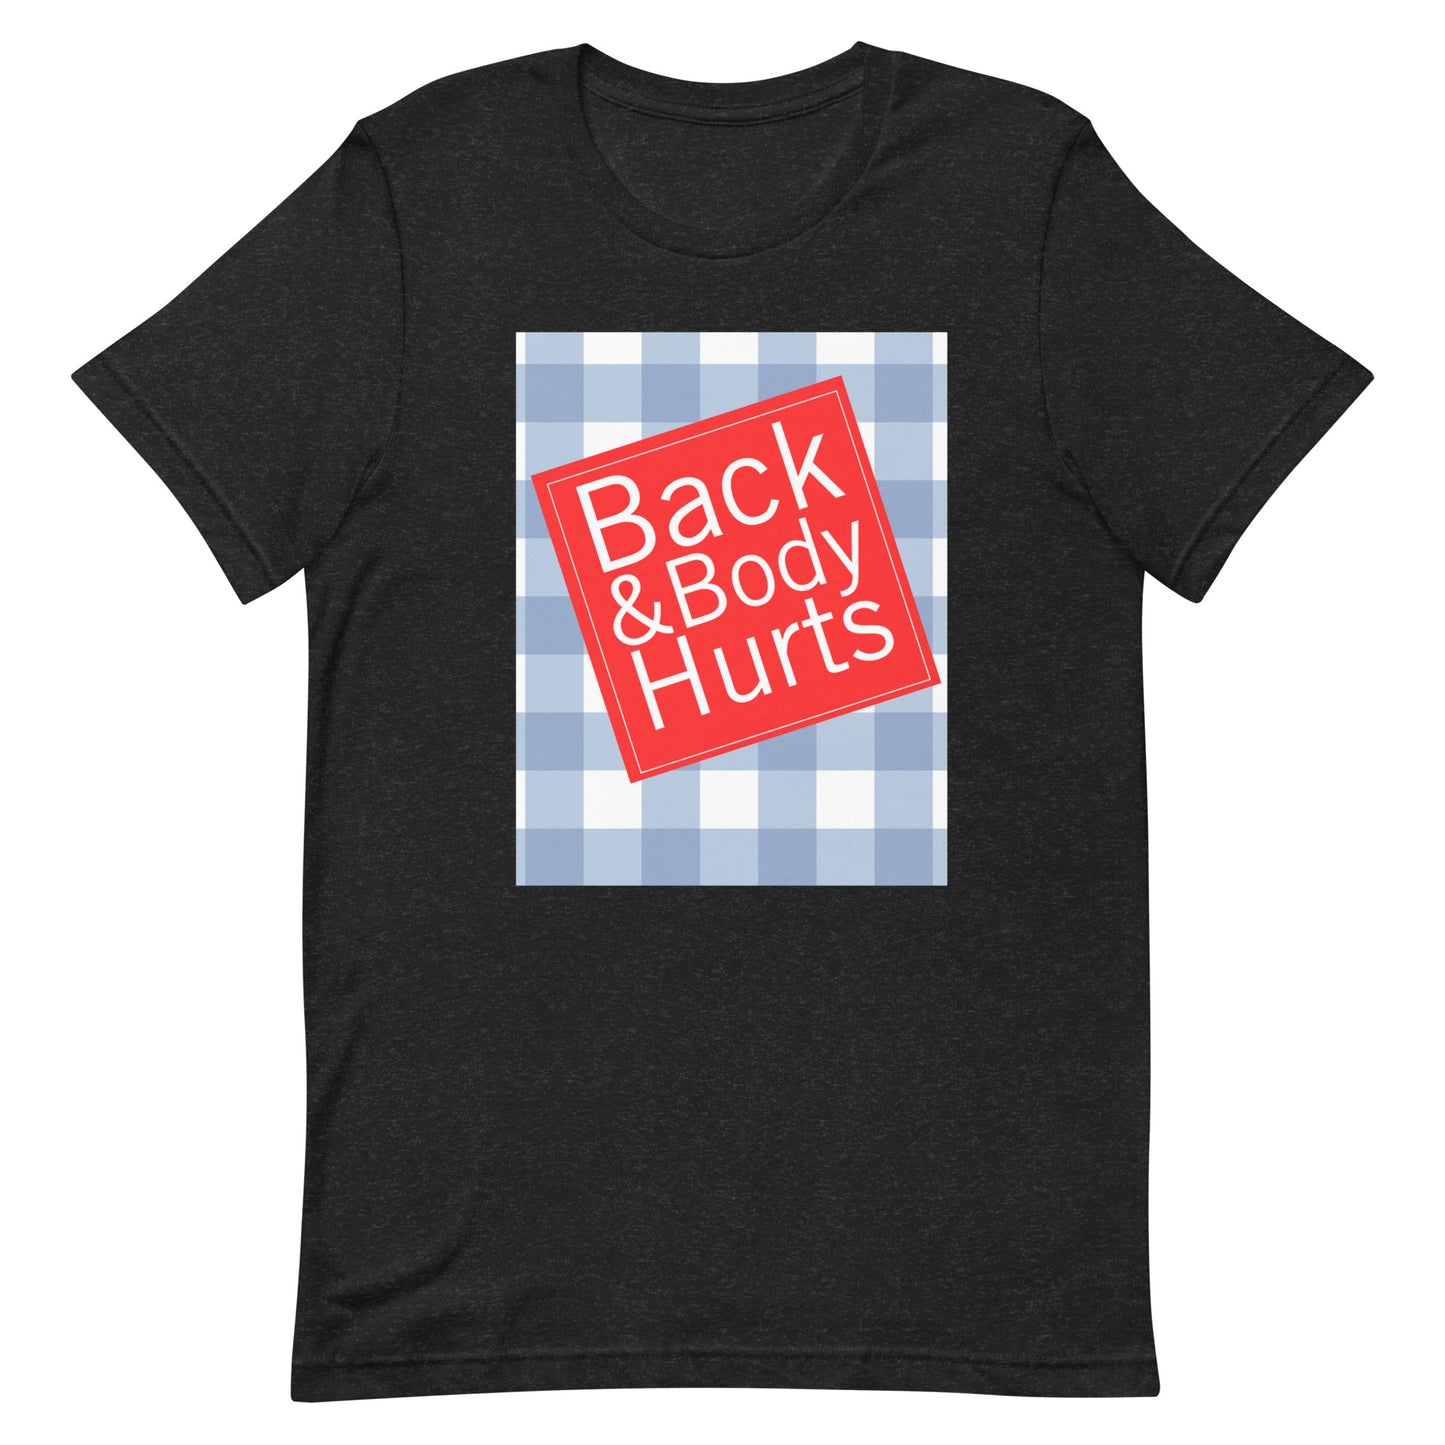 Back And Body Hurts T-shirt Black | House of Dad